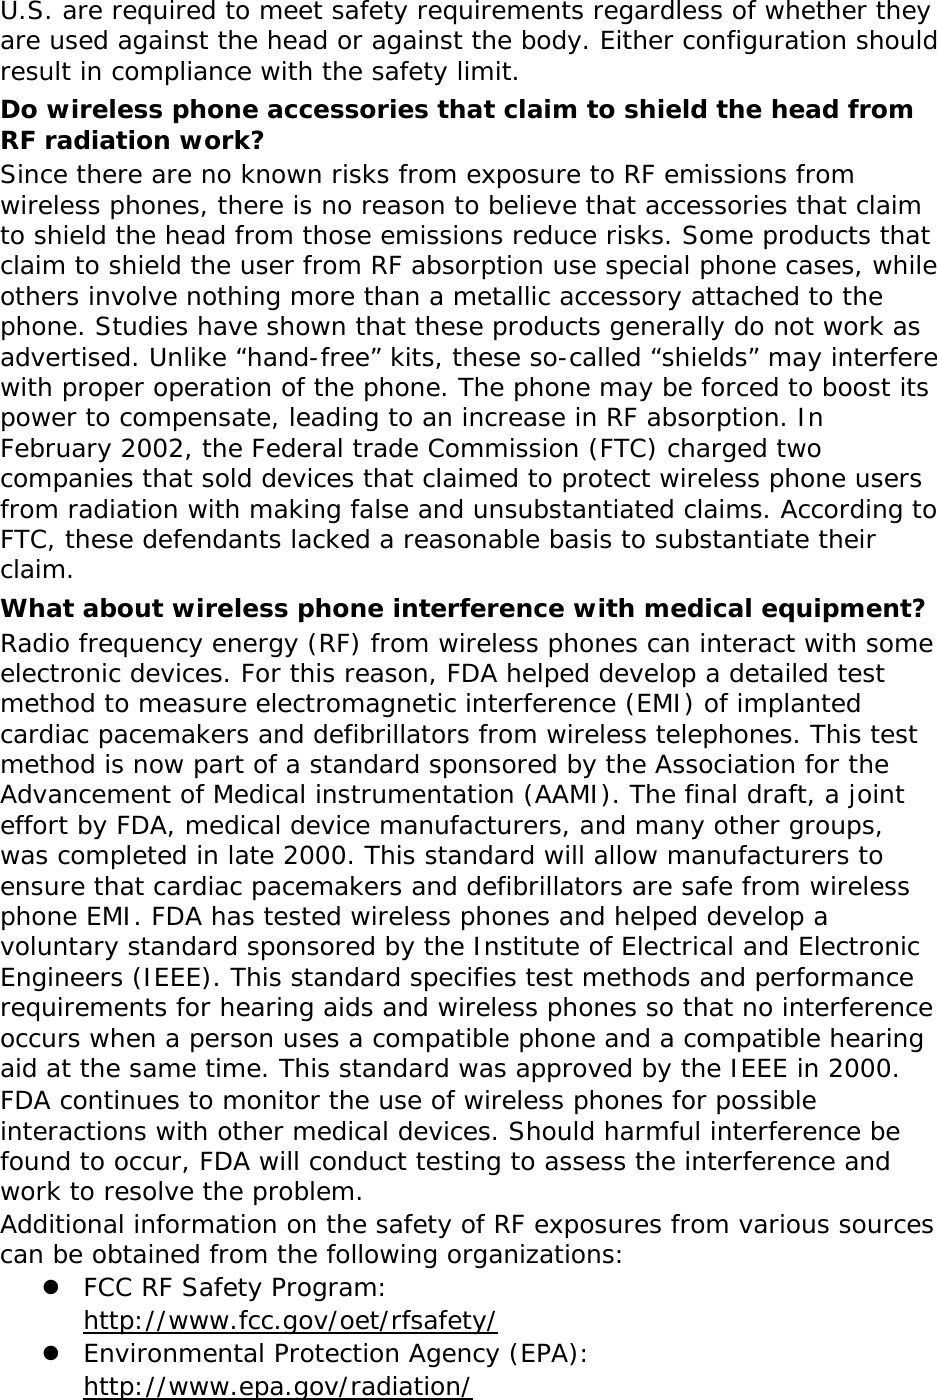 U.S. are required to meet safety requirements regardless of whether they are used against the head or against the body. Either configuration should result in compliance with the safety limit. Do wireless phone accessories that claim to shield the head from RF radiation work? Since there are no known risks from exposure to RF emissions from wireless phones, there is no reason to believe that accessories that claim to shield the head from those emissions reduce risks. Some products that claim to shield the user from RF absorption use special phone cases, while others involve nothing more than a metallic accessory attached to the phone. Studies have shown that these products generally do not work as advertised. Unlike “hand-free” kits, these so-called “shields” may interfere with proper operation of the phone. The phone may be forced to boost its power to compensate, leading to an increase in RF absorption. In February 2002, the Federal trade Commission (FTC) charged two companies that sold devices that claimed to protect wireless phone users from radiation with making false and unsubstantiated claims. According to FTC, these defendants lacked a reasonable basis to substantiate their claim. What about wireless phone interference with medical equipment? Radio frequency energy (RF) from wireless phones can interact with some electronic devices. For this reason, FDA helped develop a detailed test method to measure electromagnetic interference (EMI) of implanted cardiac pacemakers and defibrillators from wireless telephones. This test method is now part of a standard sponsored by the Association for the Advancement of Medical instrumentation (AAMI). The final draft, a joint effort by FDA, medical device manufacturers, and many other groups, was completed in late 2000. This standard will allow manufacturers to ensure that cardiac pacemakers and defibrillators are safe from wireless phone EMI. FDA has tested wireless phones and helped develop a voluntary standard sponsored by the Institute of Electrical and Electronic Engineers (IEEE). This standard specifies test methods and performance requirements for hearing aids and wireless phones so that no interference occurs when a person uses a compatible phone and a compatible hearing aid at the same time. This standard was approved by the IEEE in 2000. FDA continues to monitor the use of wireless phones for possible interactions with other medical devices. Should harmful interference be found to occur, FDA will conduct testing to assess the interference and work to resolve the problem. Additional information on the safety of RF exposures from various sources can be obtained from the following organizations: z FCC RF Safety Program:  http://www.fcc.gov/oet/rfsafety/ z Environmental Protection Agency (EPA):  http://www.epa.gov/radiation/ 